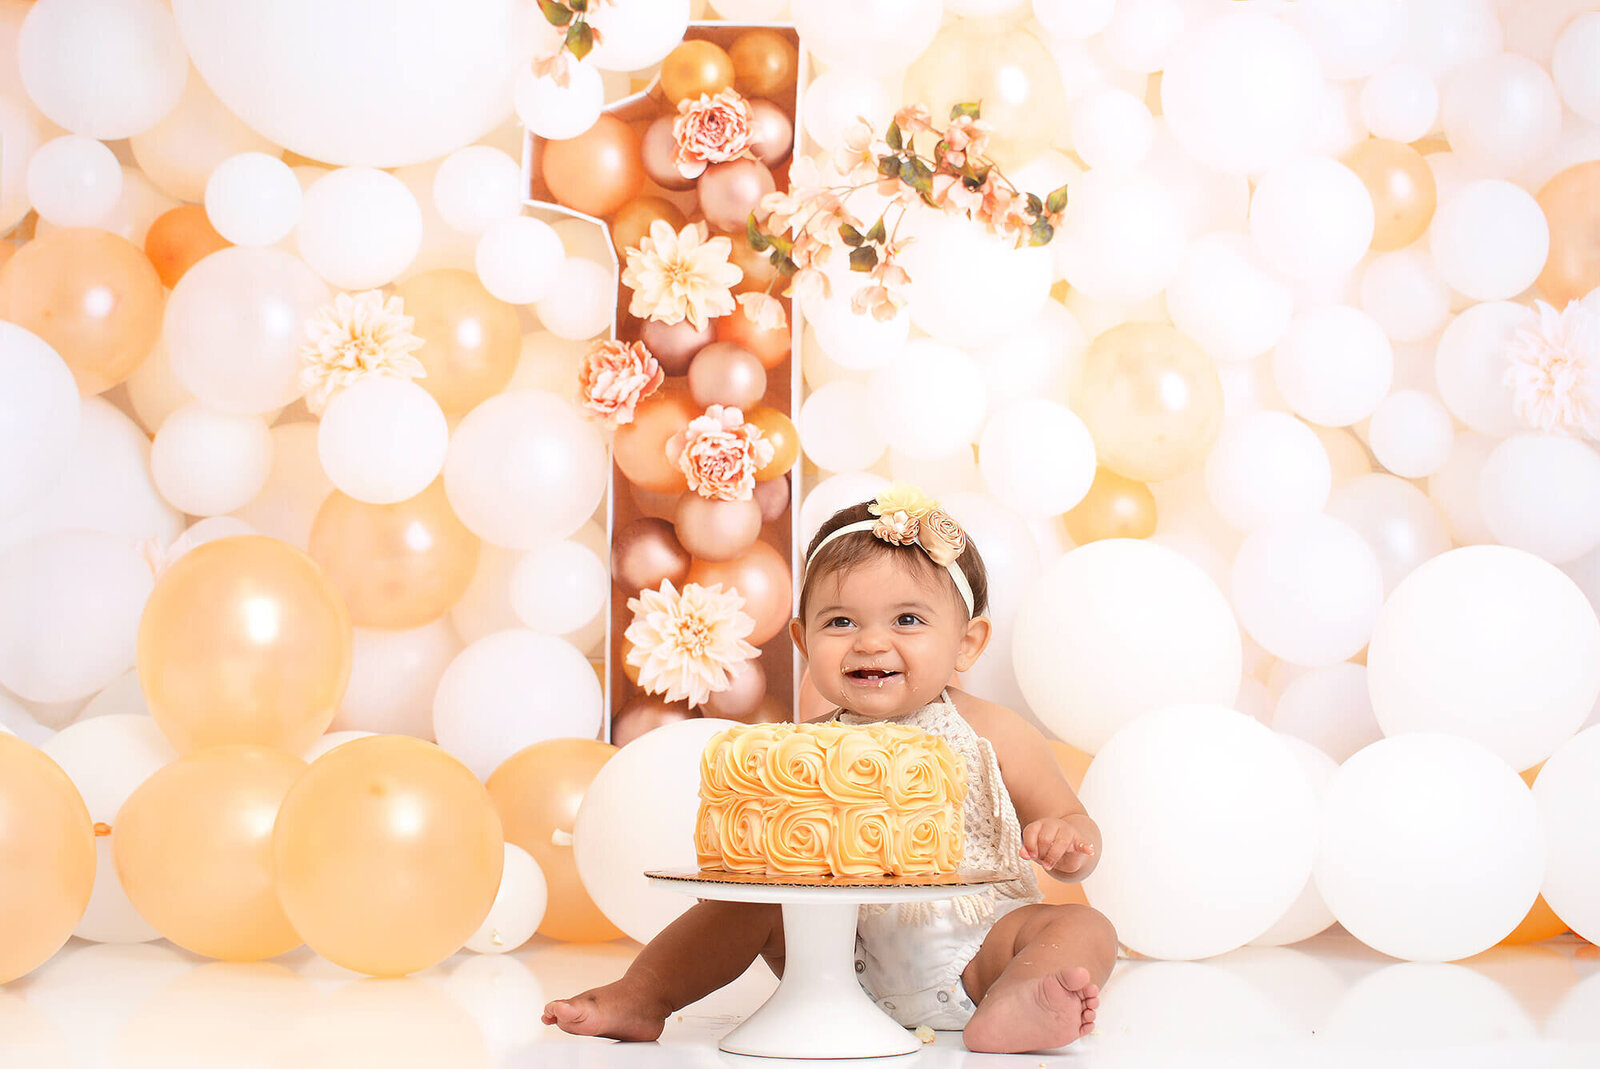 girl smiles directly behind a peach rosette style cake, with a large 1 behind her made from peach and white flowers